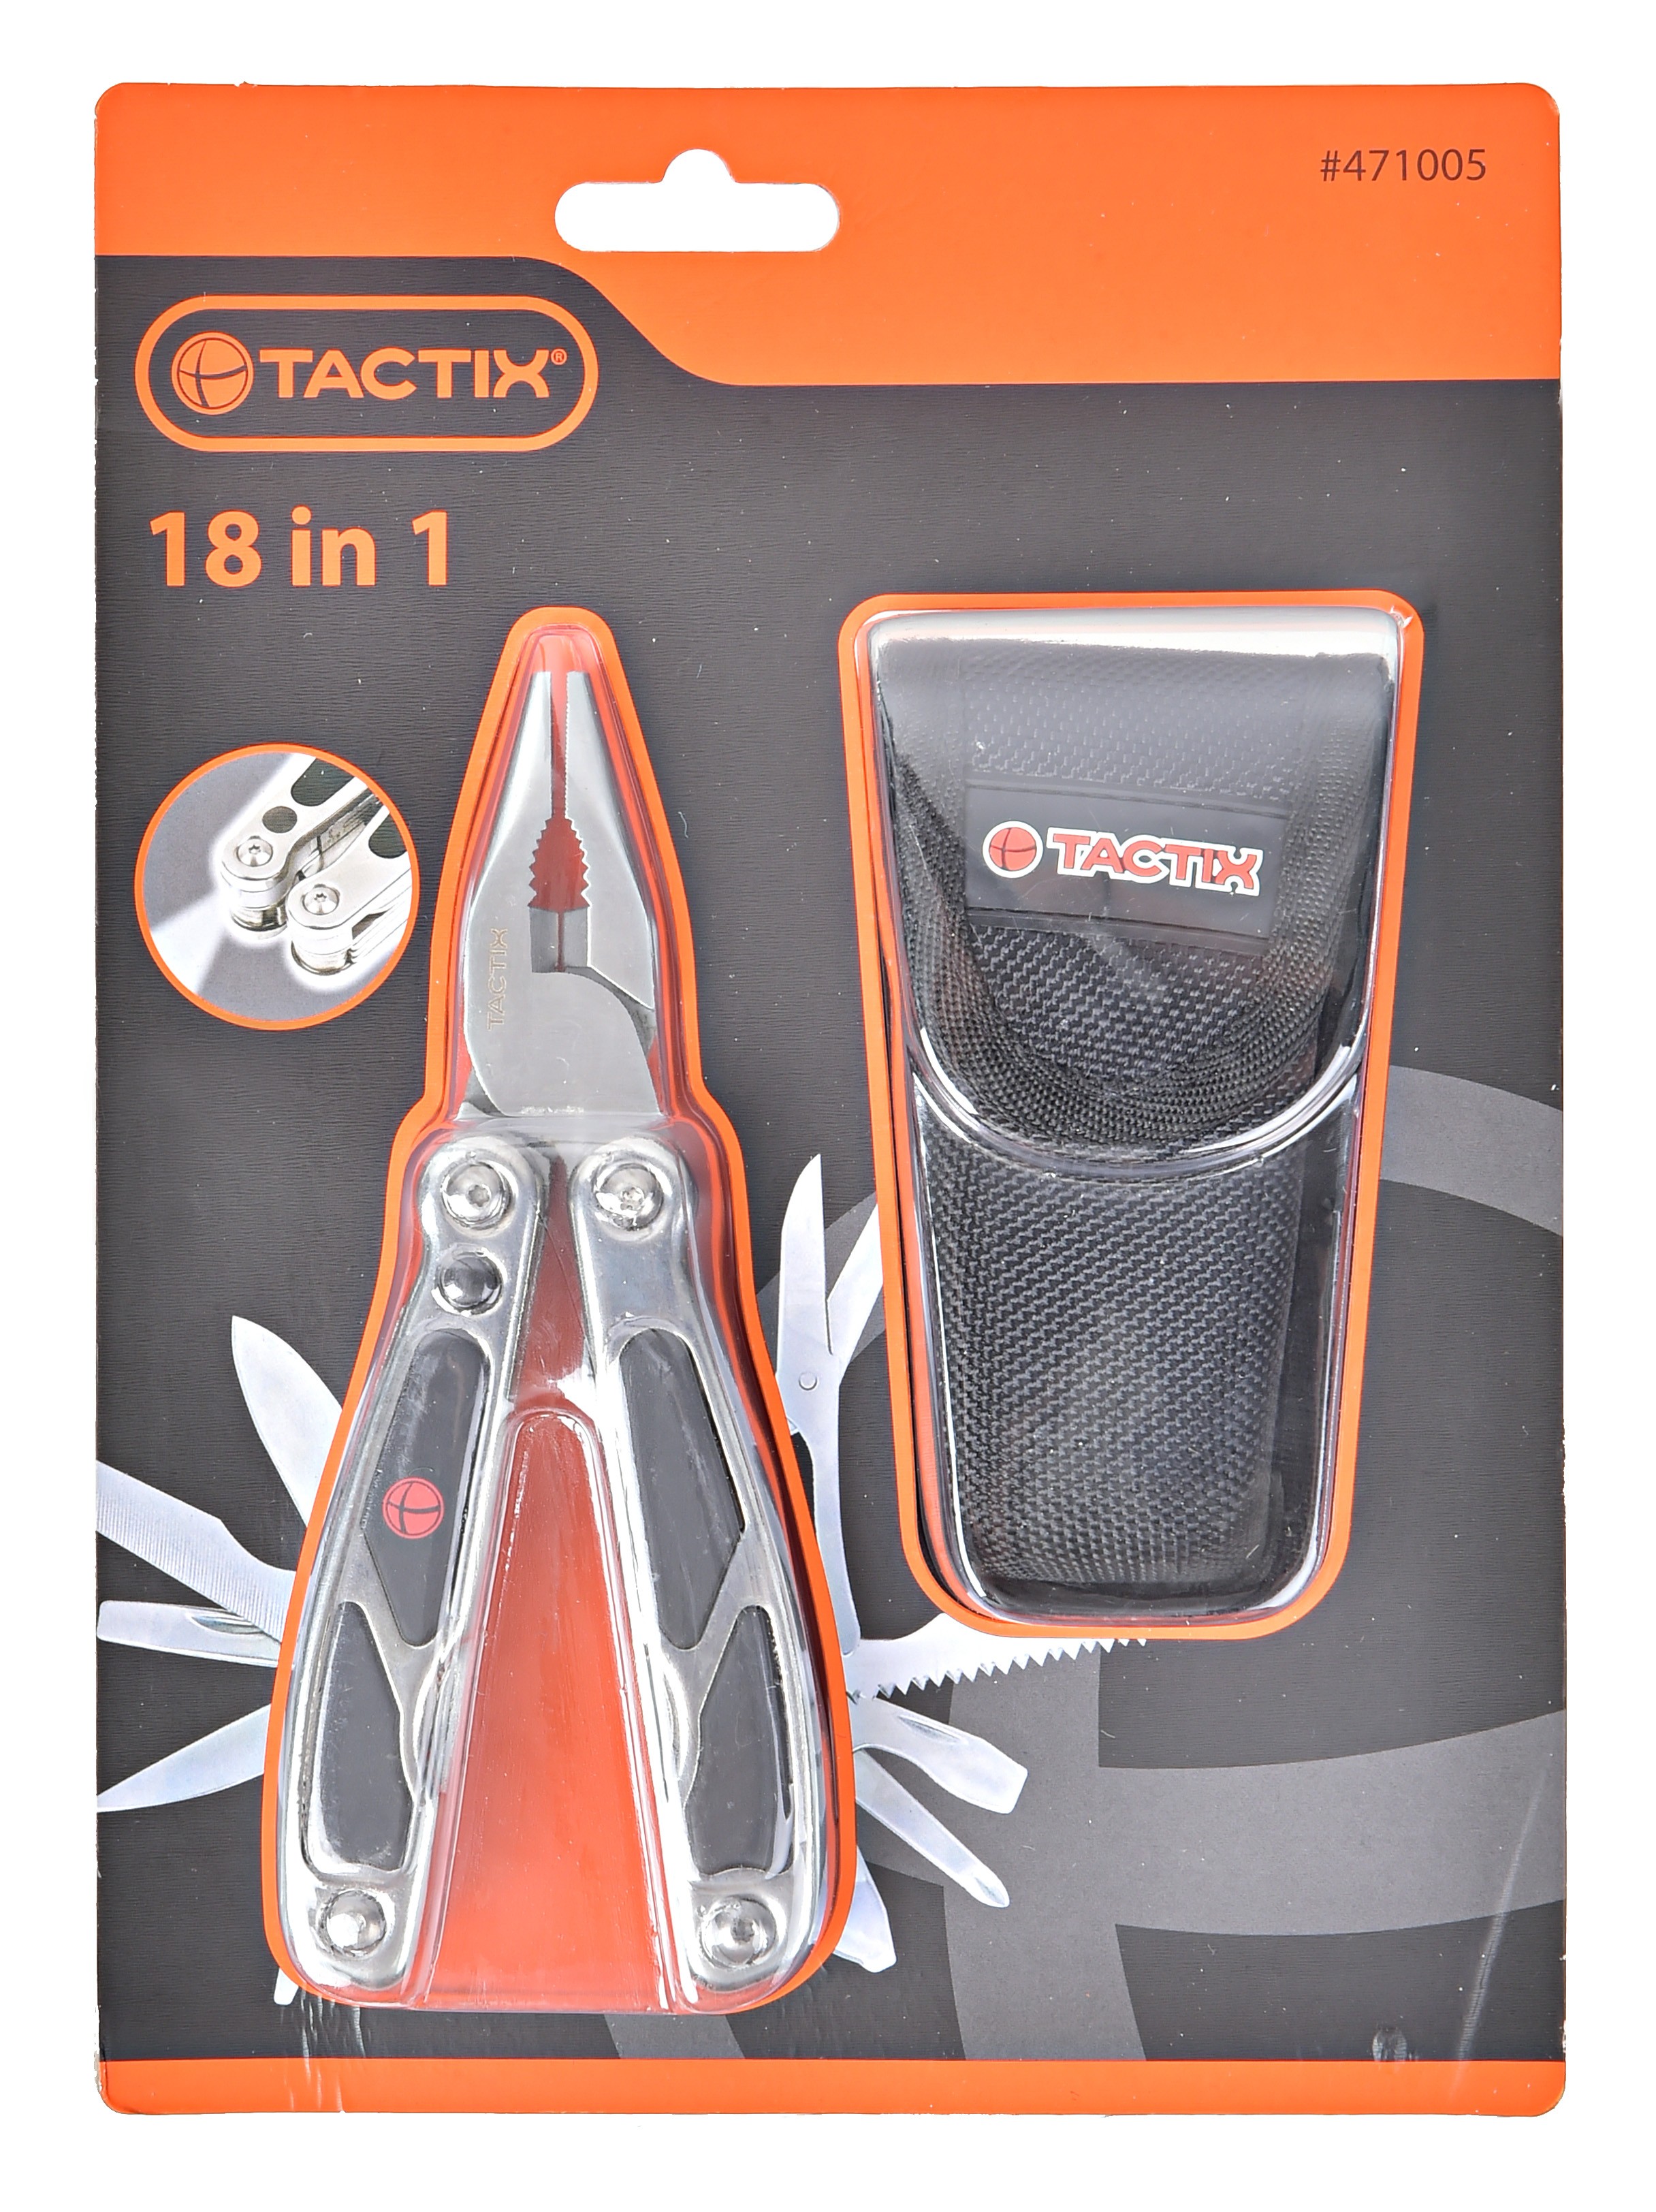 Multi-tool with led light - 471005